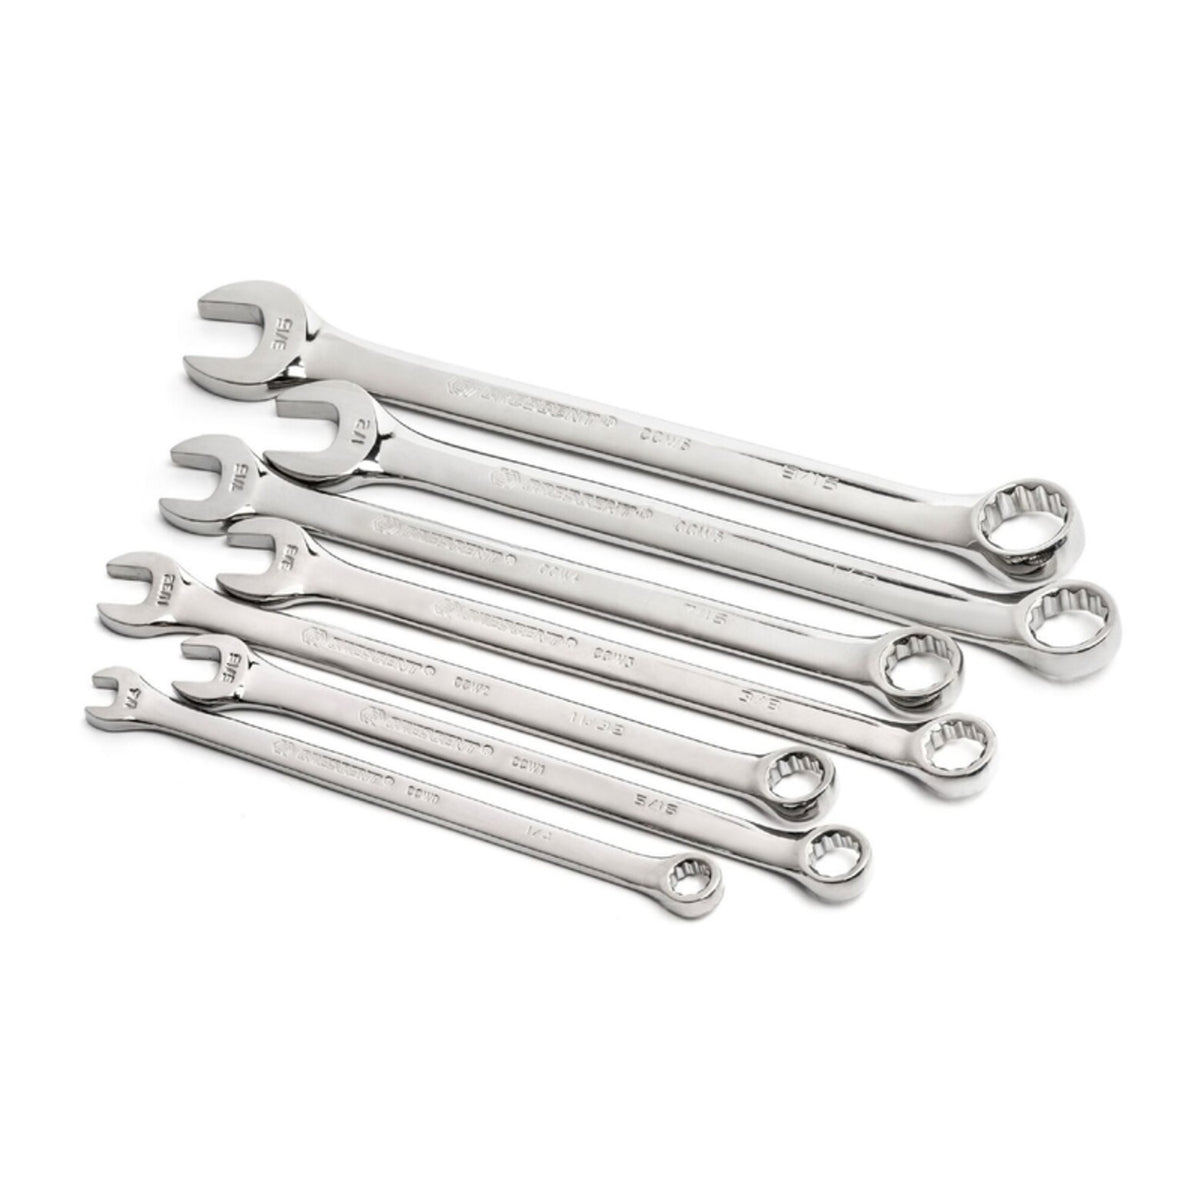 Crescent CCWSRSAE7 SAE Combination Wrench Set, 12 Point. Silver